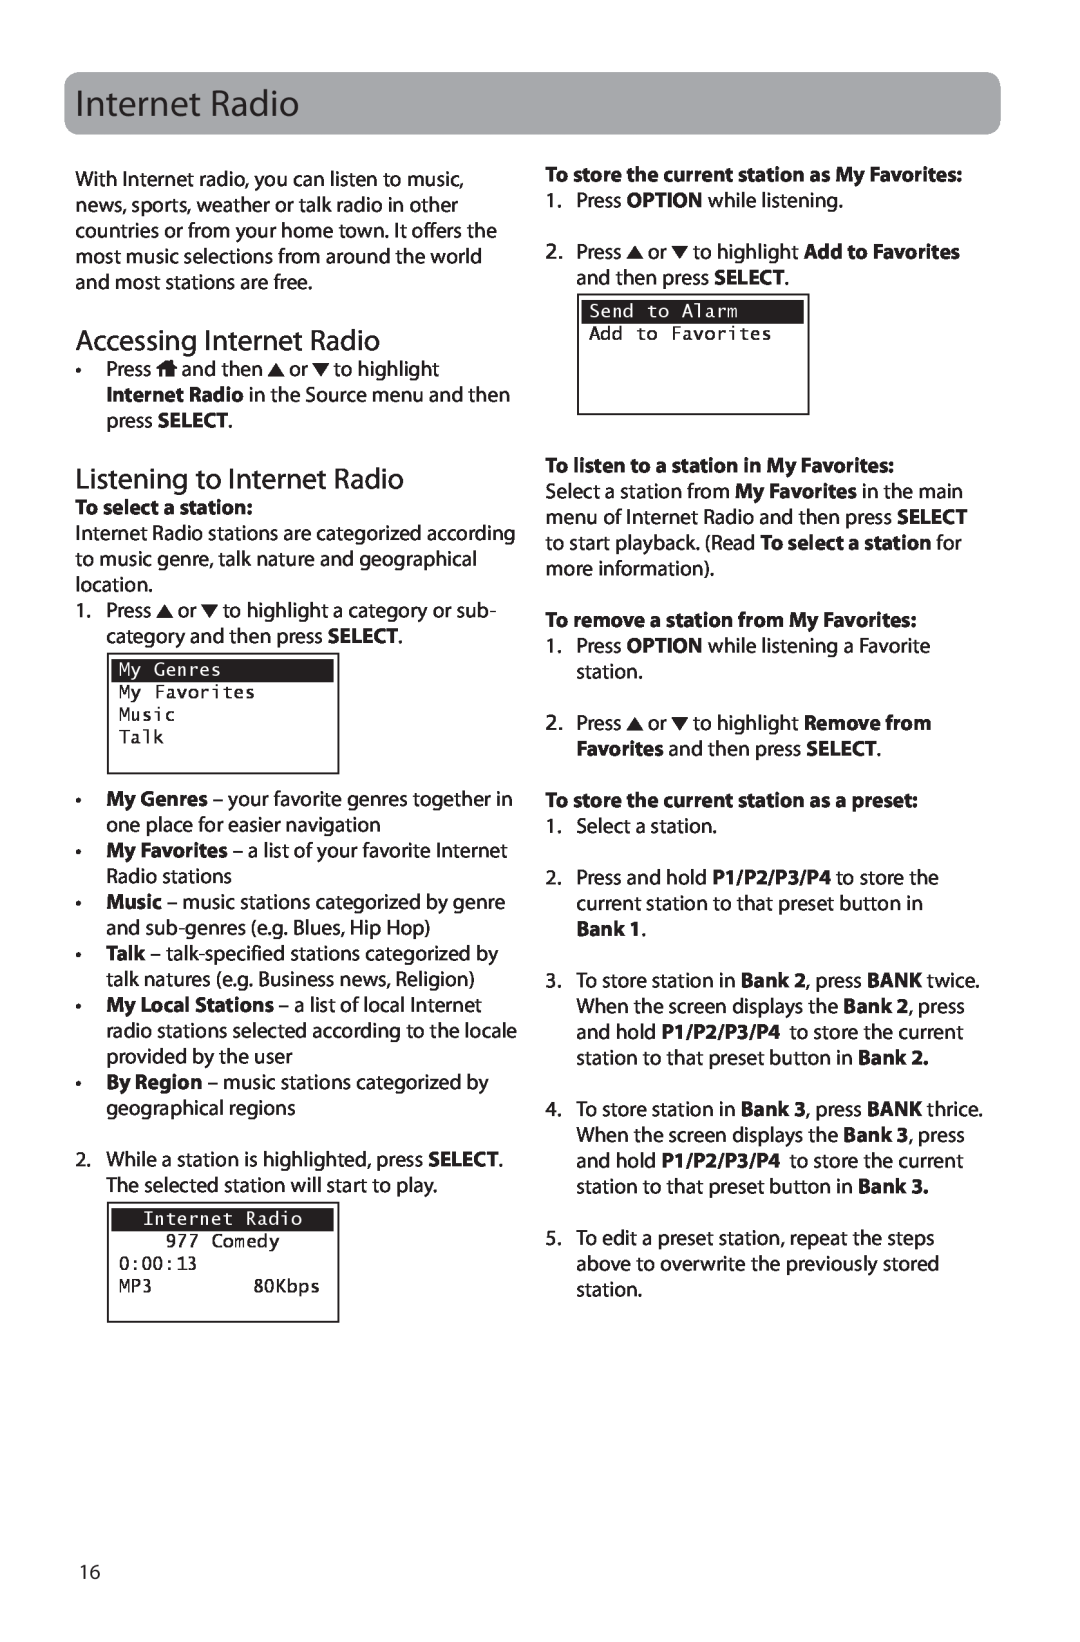 Acoustic Research ARIR150 user manual Accessing Internet Radio, Listening to Internet Radio, To select a station 